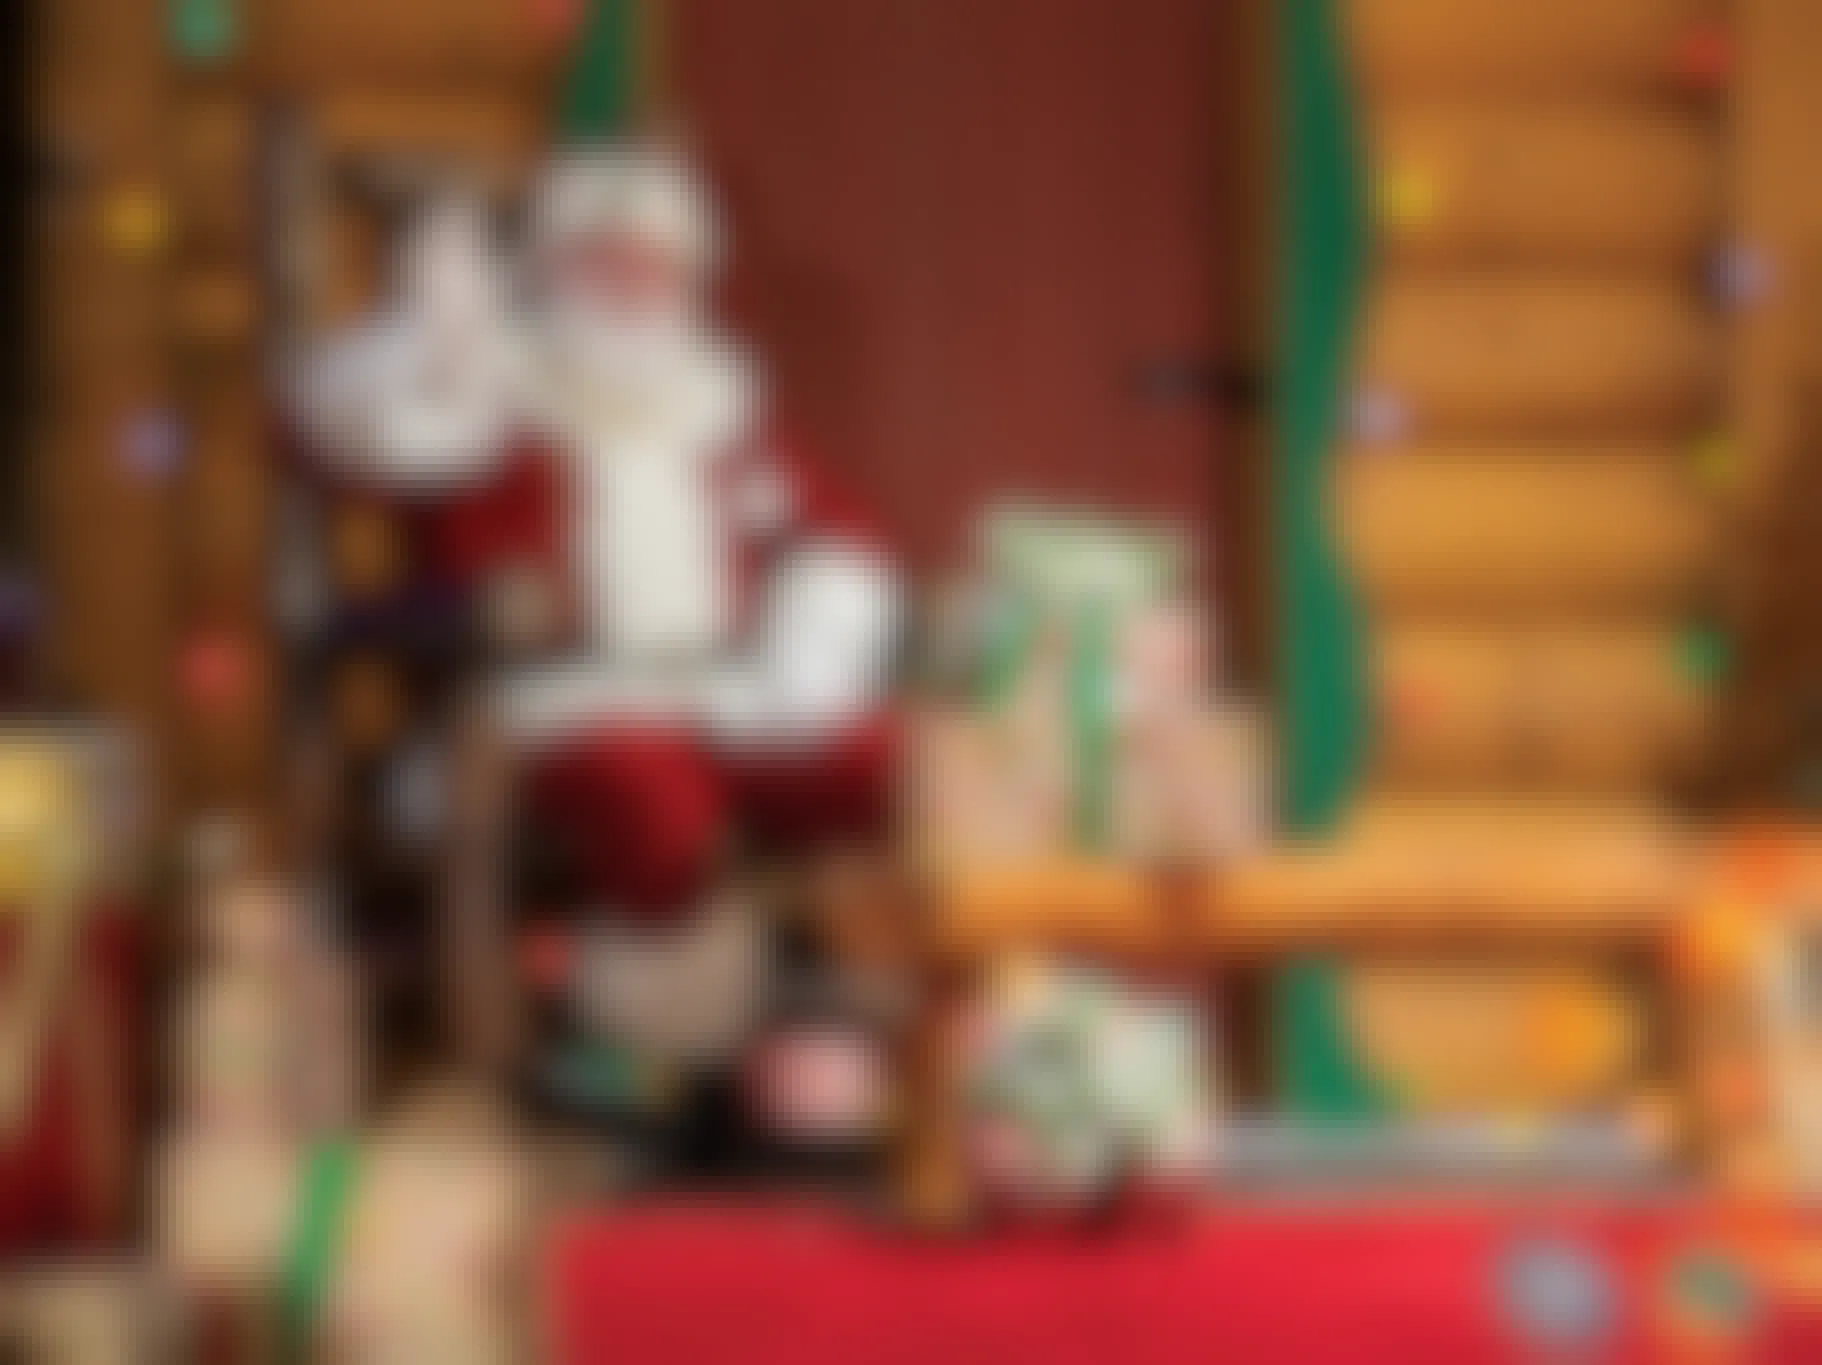 Santa sitting on a chair in the Santa's Wonderland set inside of a Bass Pro Shops store